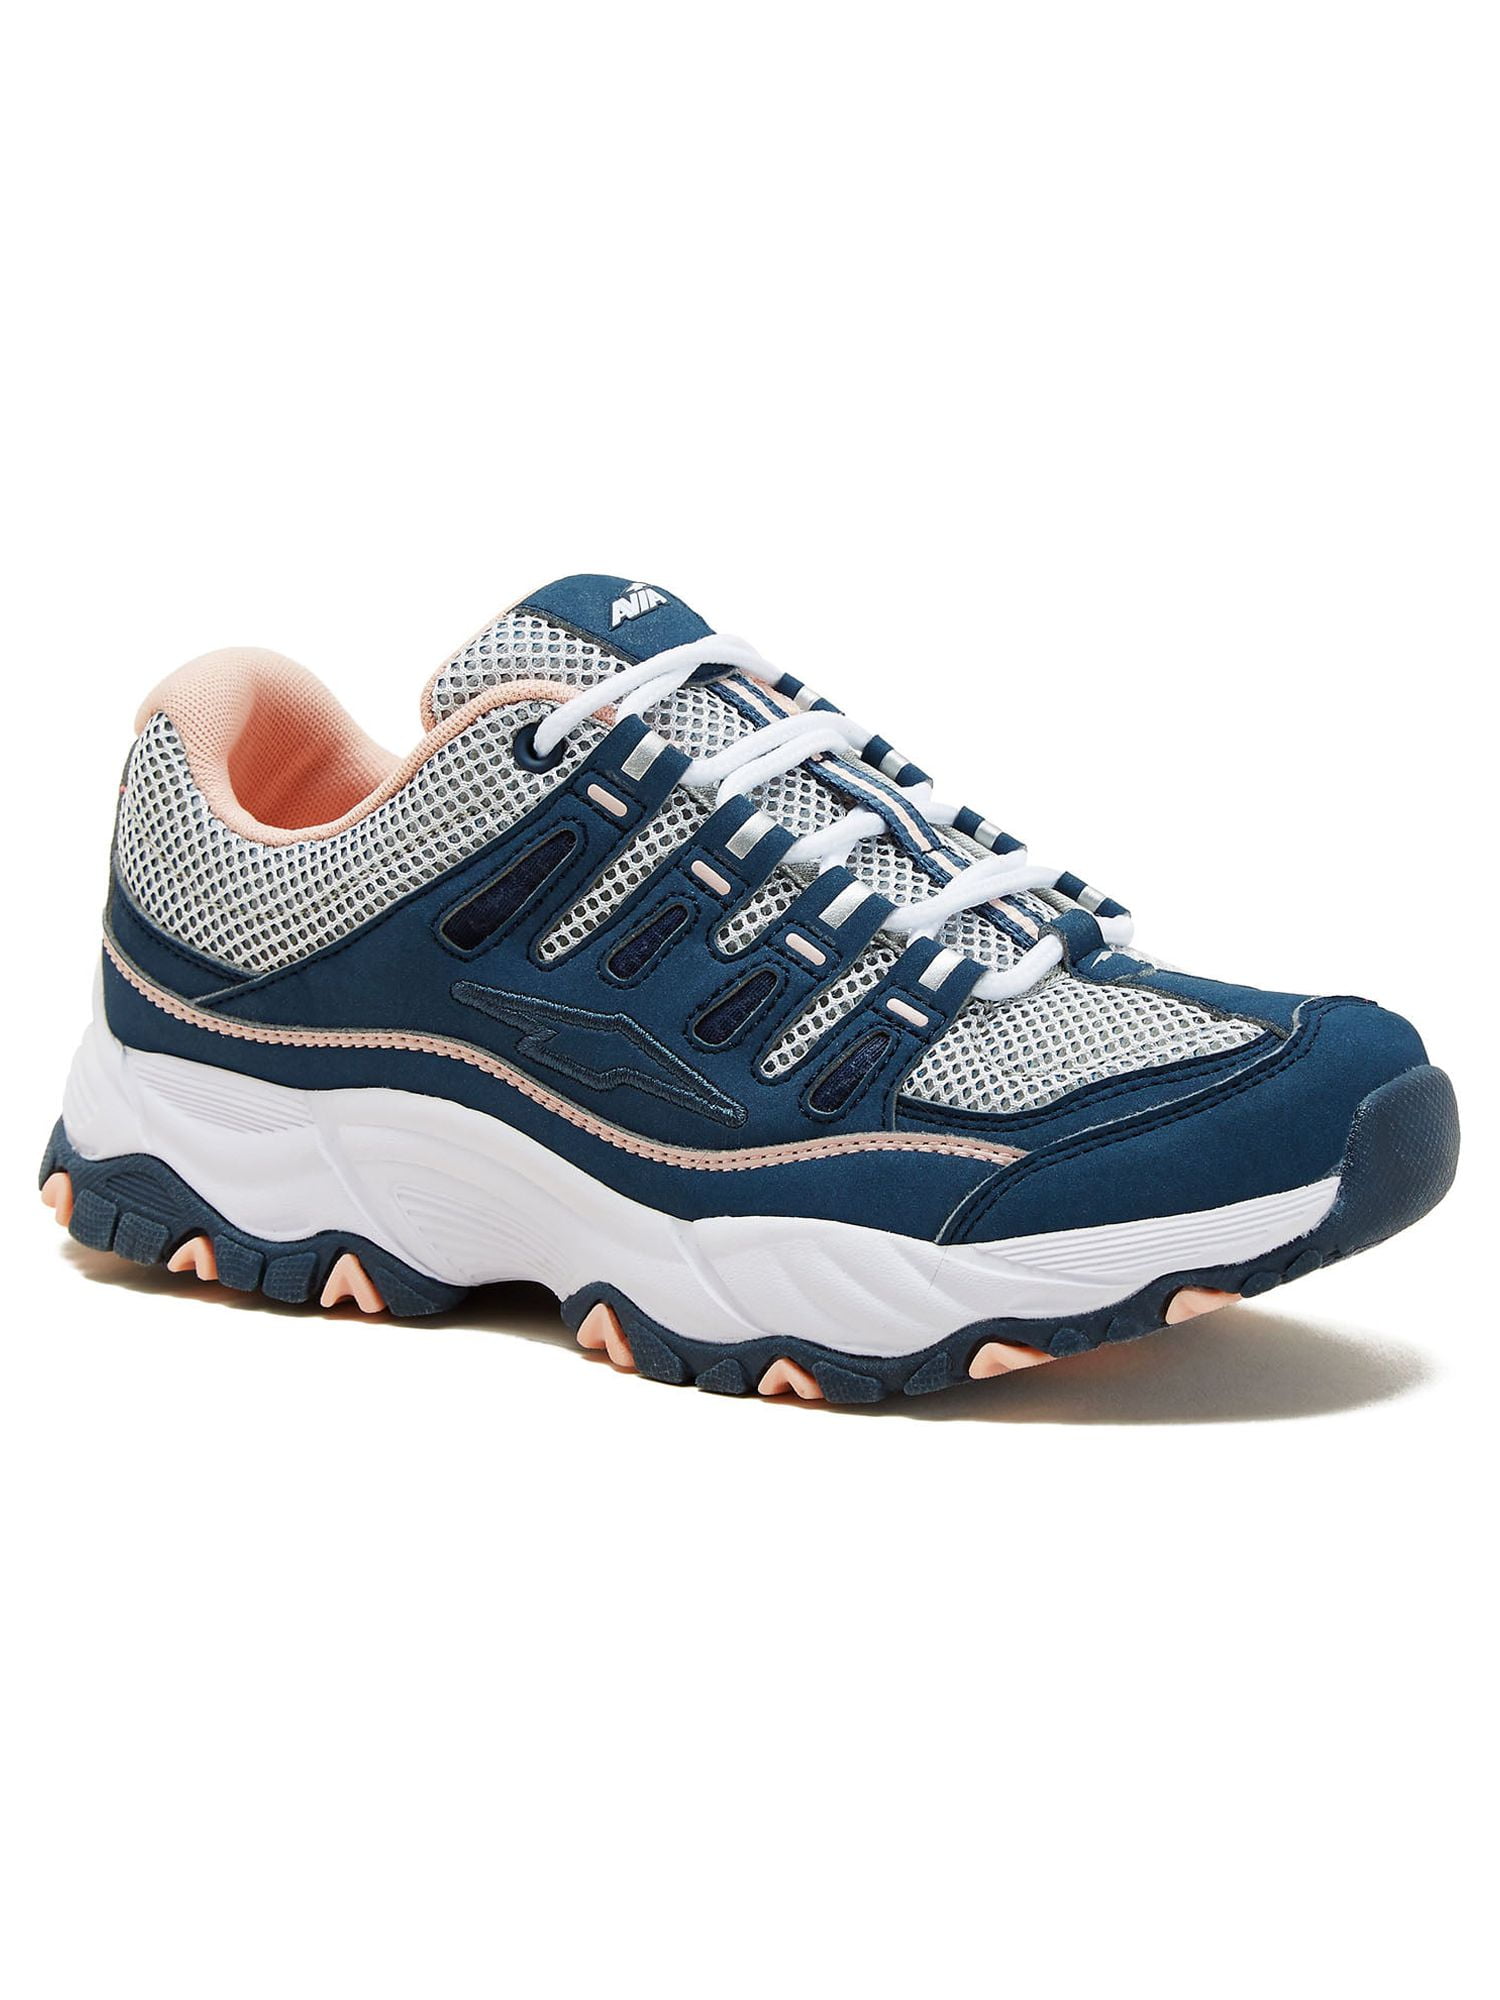 Avia Women's Elevate Athletic Shoes, Sizes 6-11, Malaysia